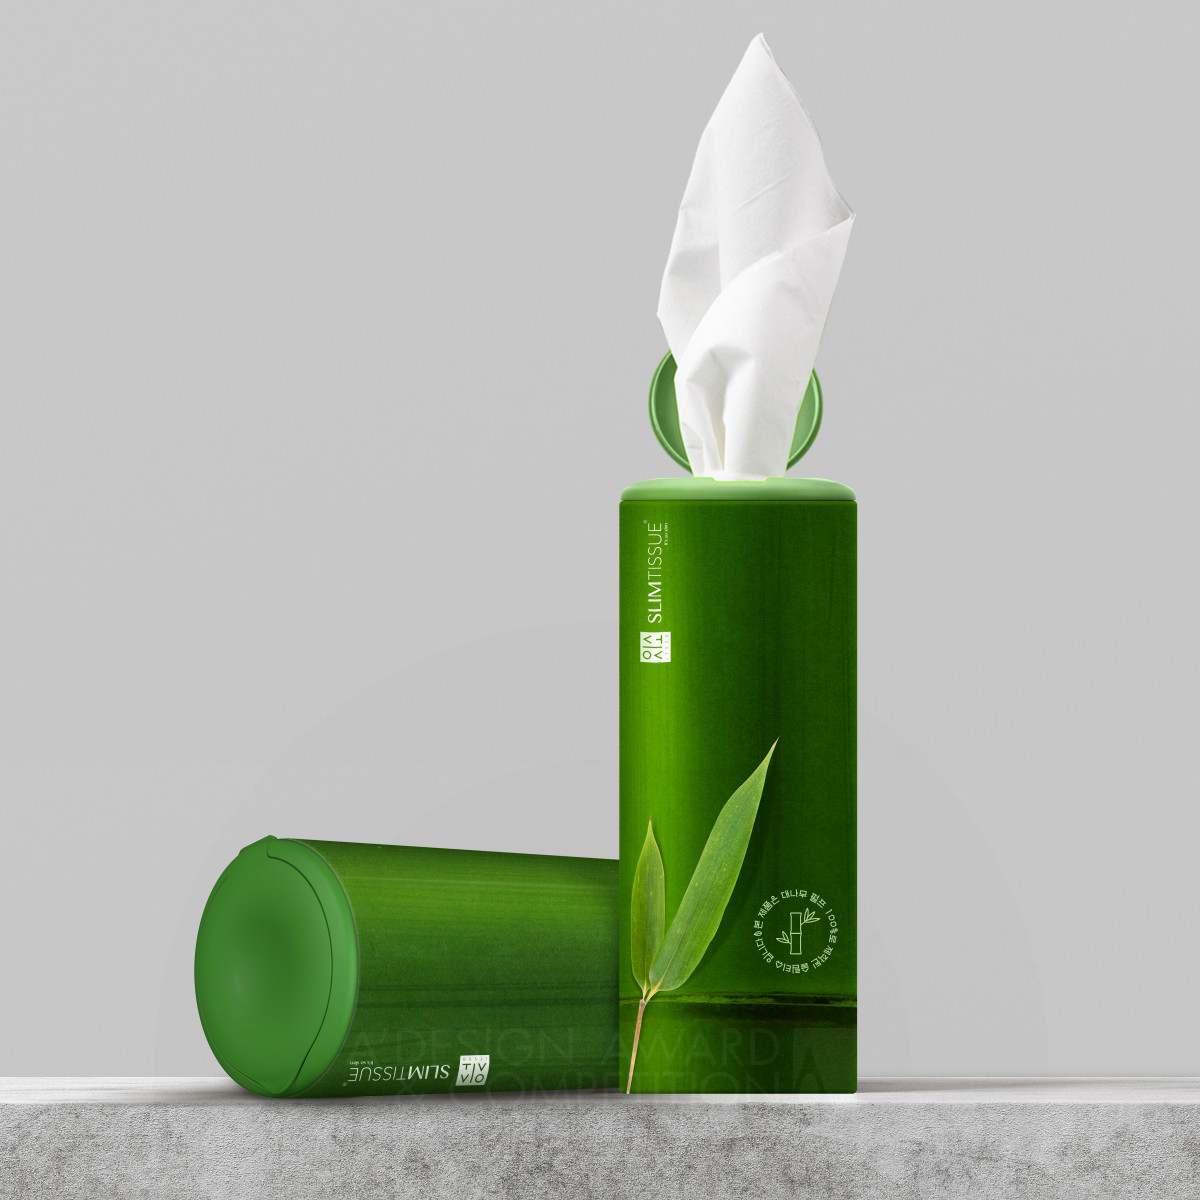 Itsso Slimtissue Tissue Package by Hyungwoo Park